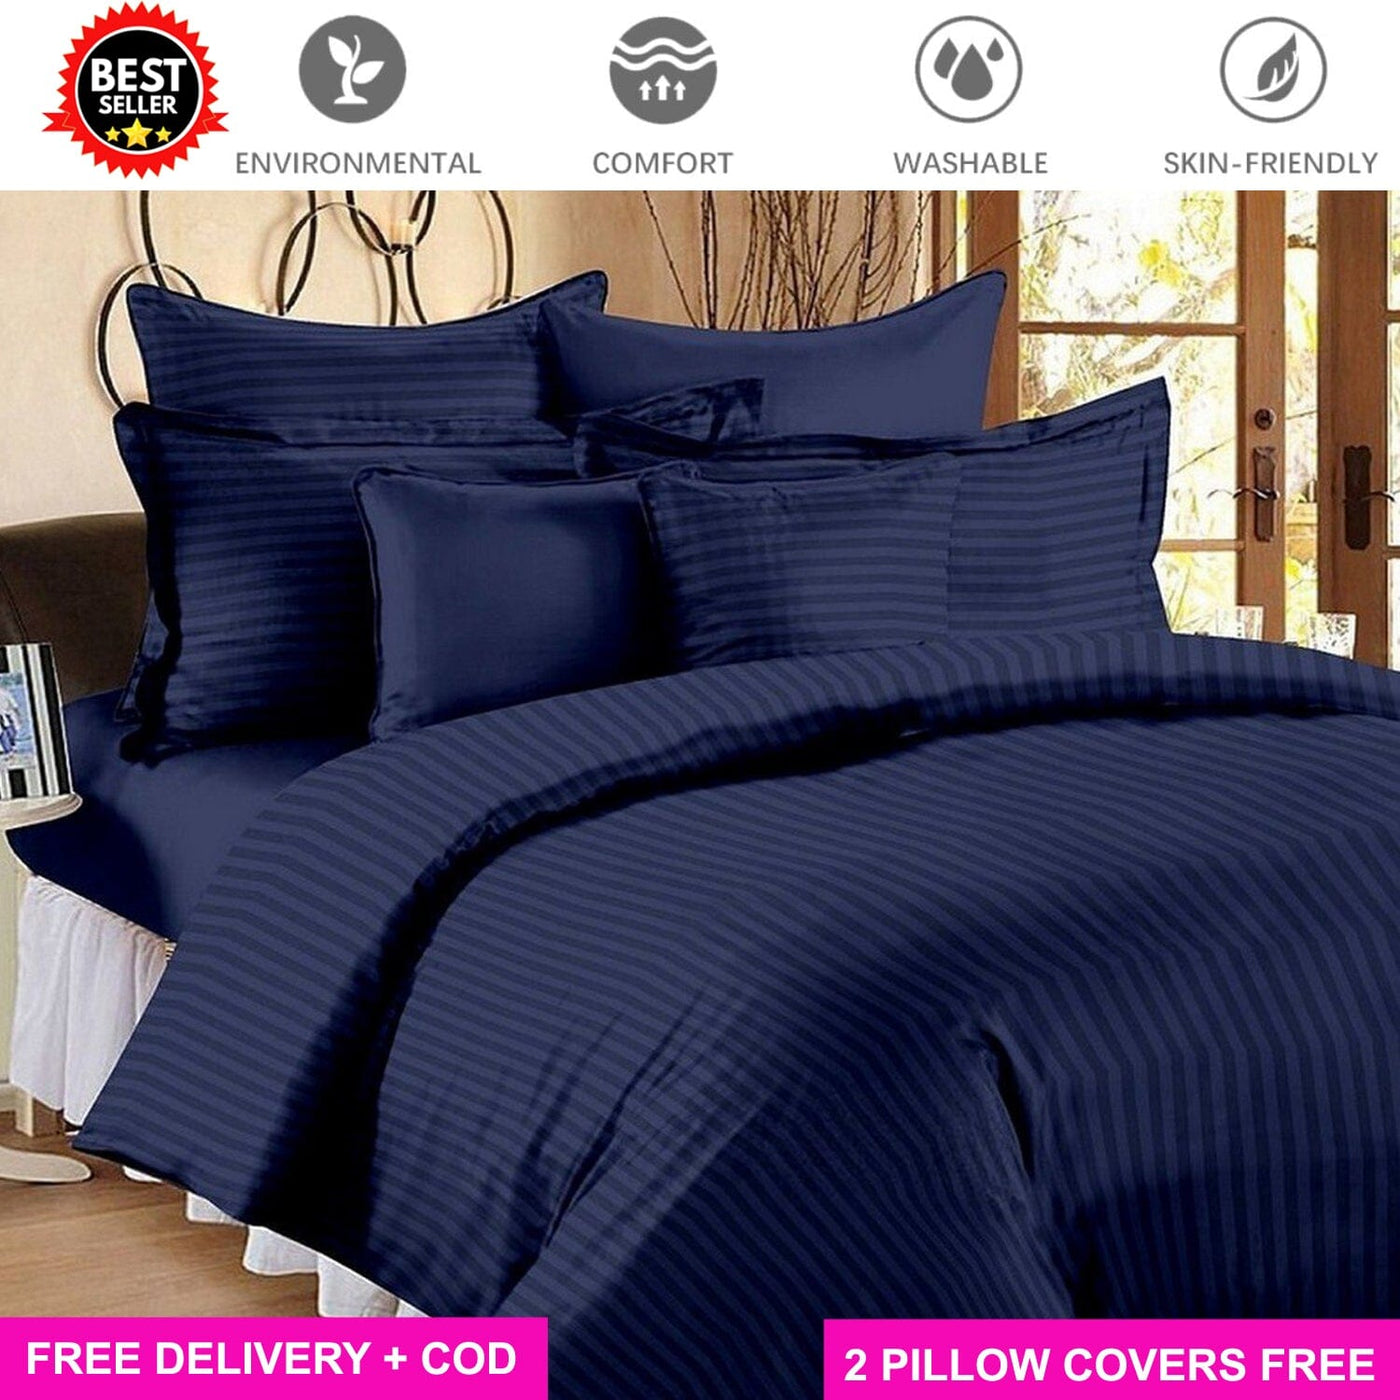 Satin Navy Blue Full Elastic Fitted Bedsheet with 2 Pillow Covers Bed Sheets Great Happy IN KING SIZE - ₹1299 